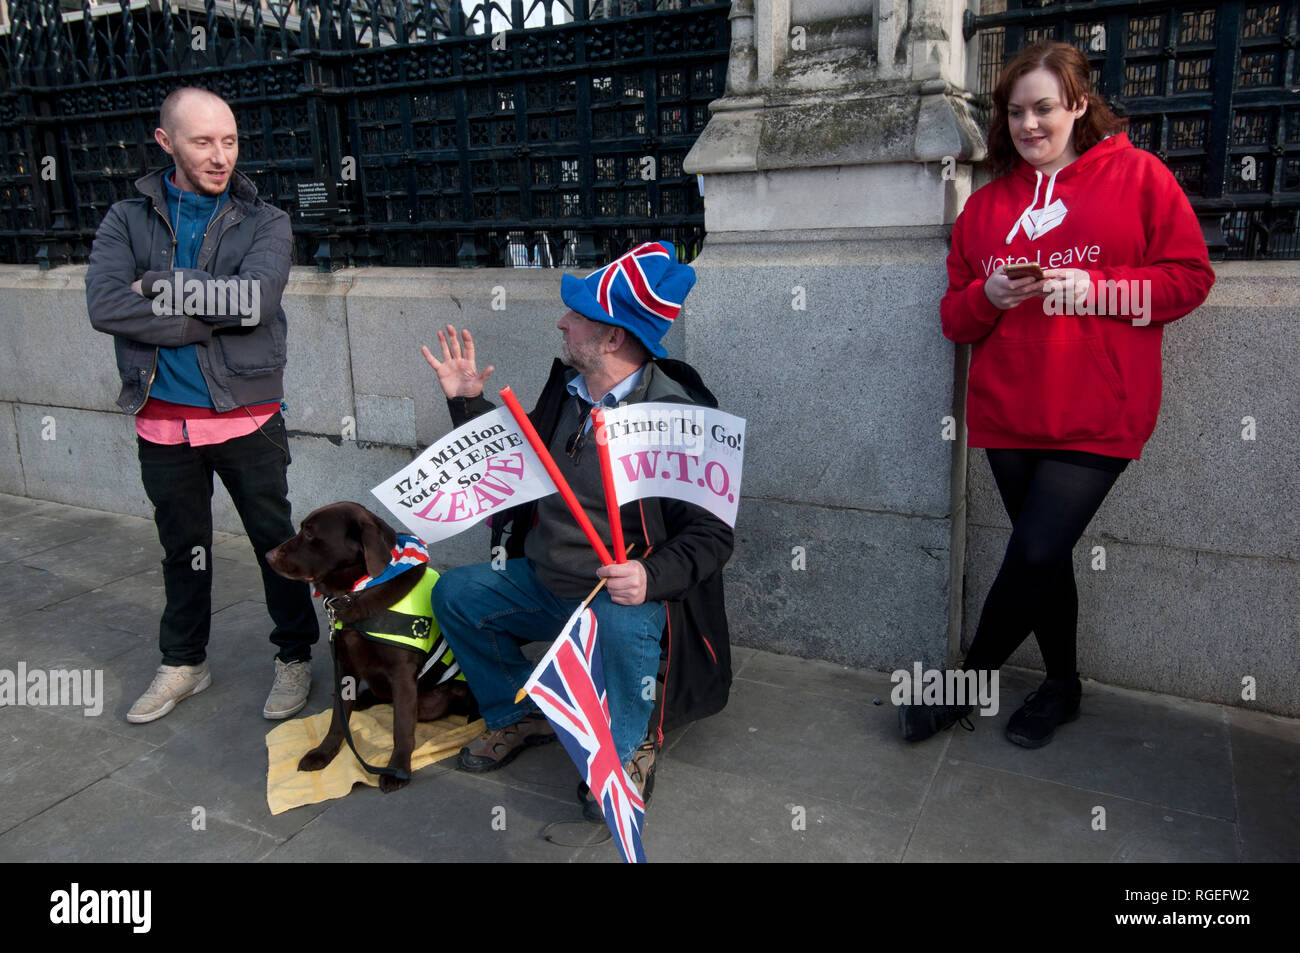 Westminster, London. January 29th 2019. Demonstrators, for and against Brexit, outside Houses of Parliament as amendments to the European withdrawal agreement are voted on. Credit: Jenny Matthews/Alamy Live News Stock Photo